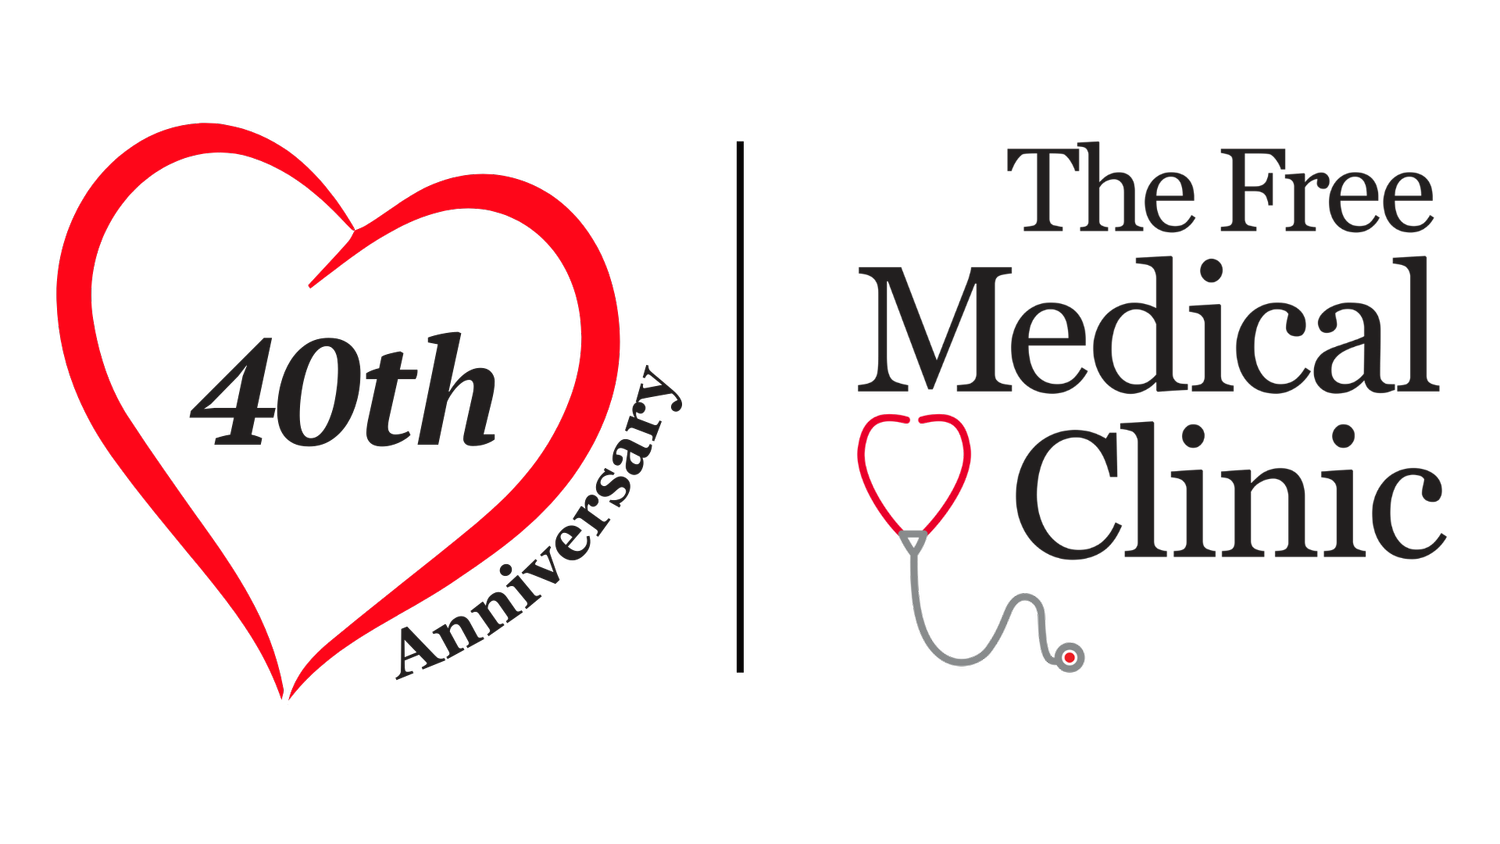 The Free Medical Clinic